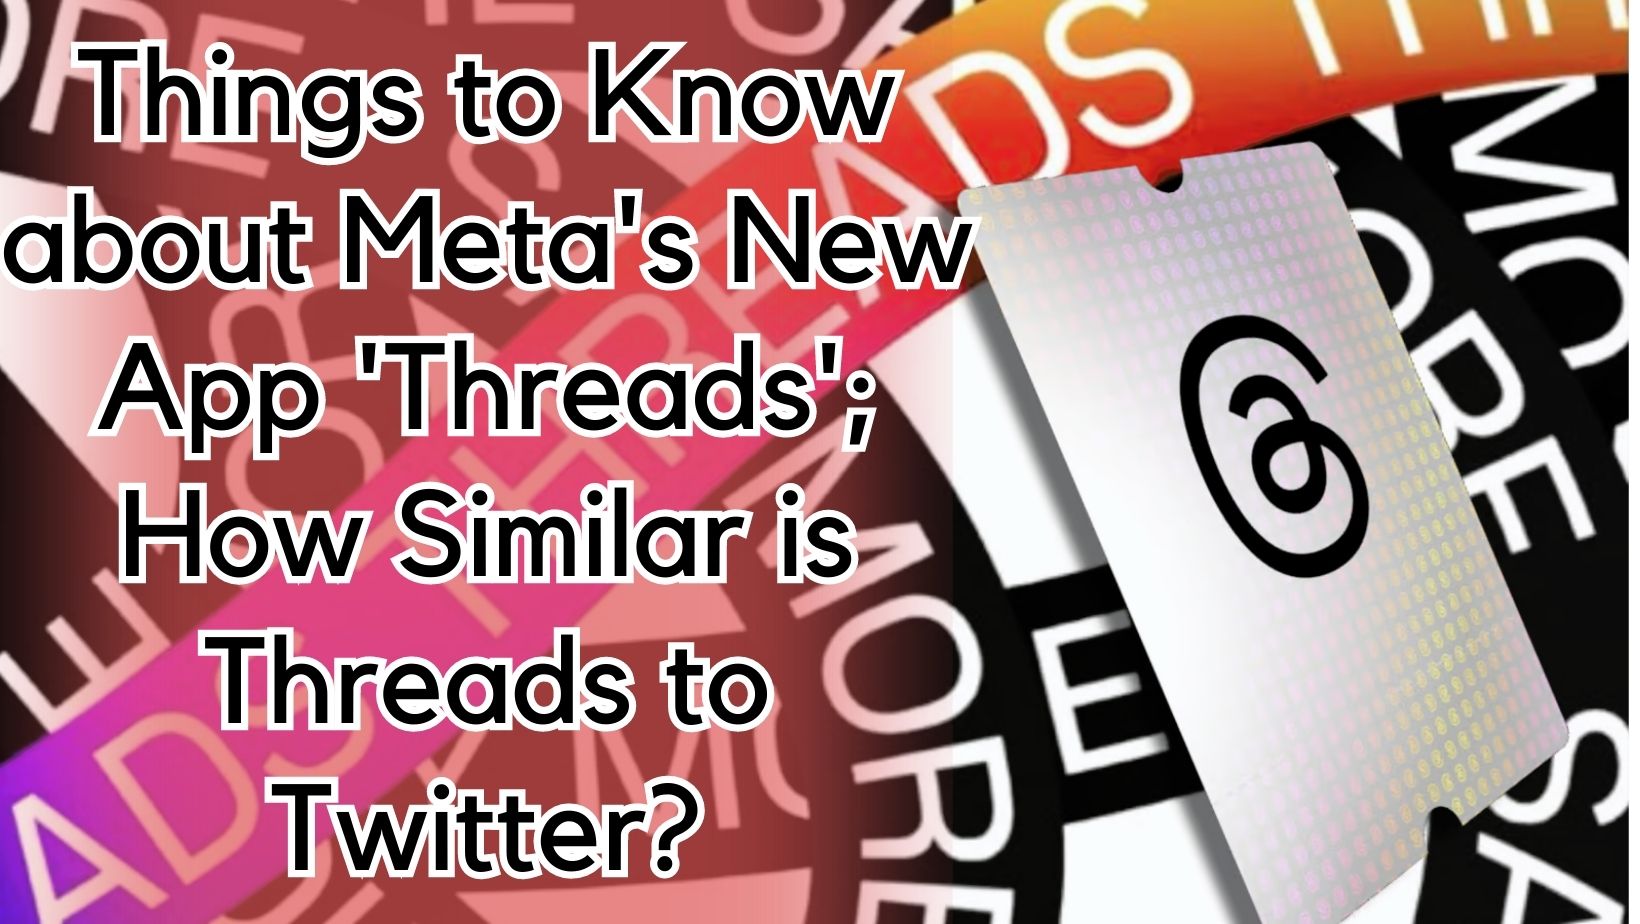 Things to Know about Meta's New App 'Threads'; How Similar is Threads to Twitter